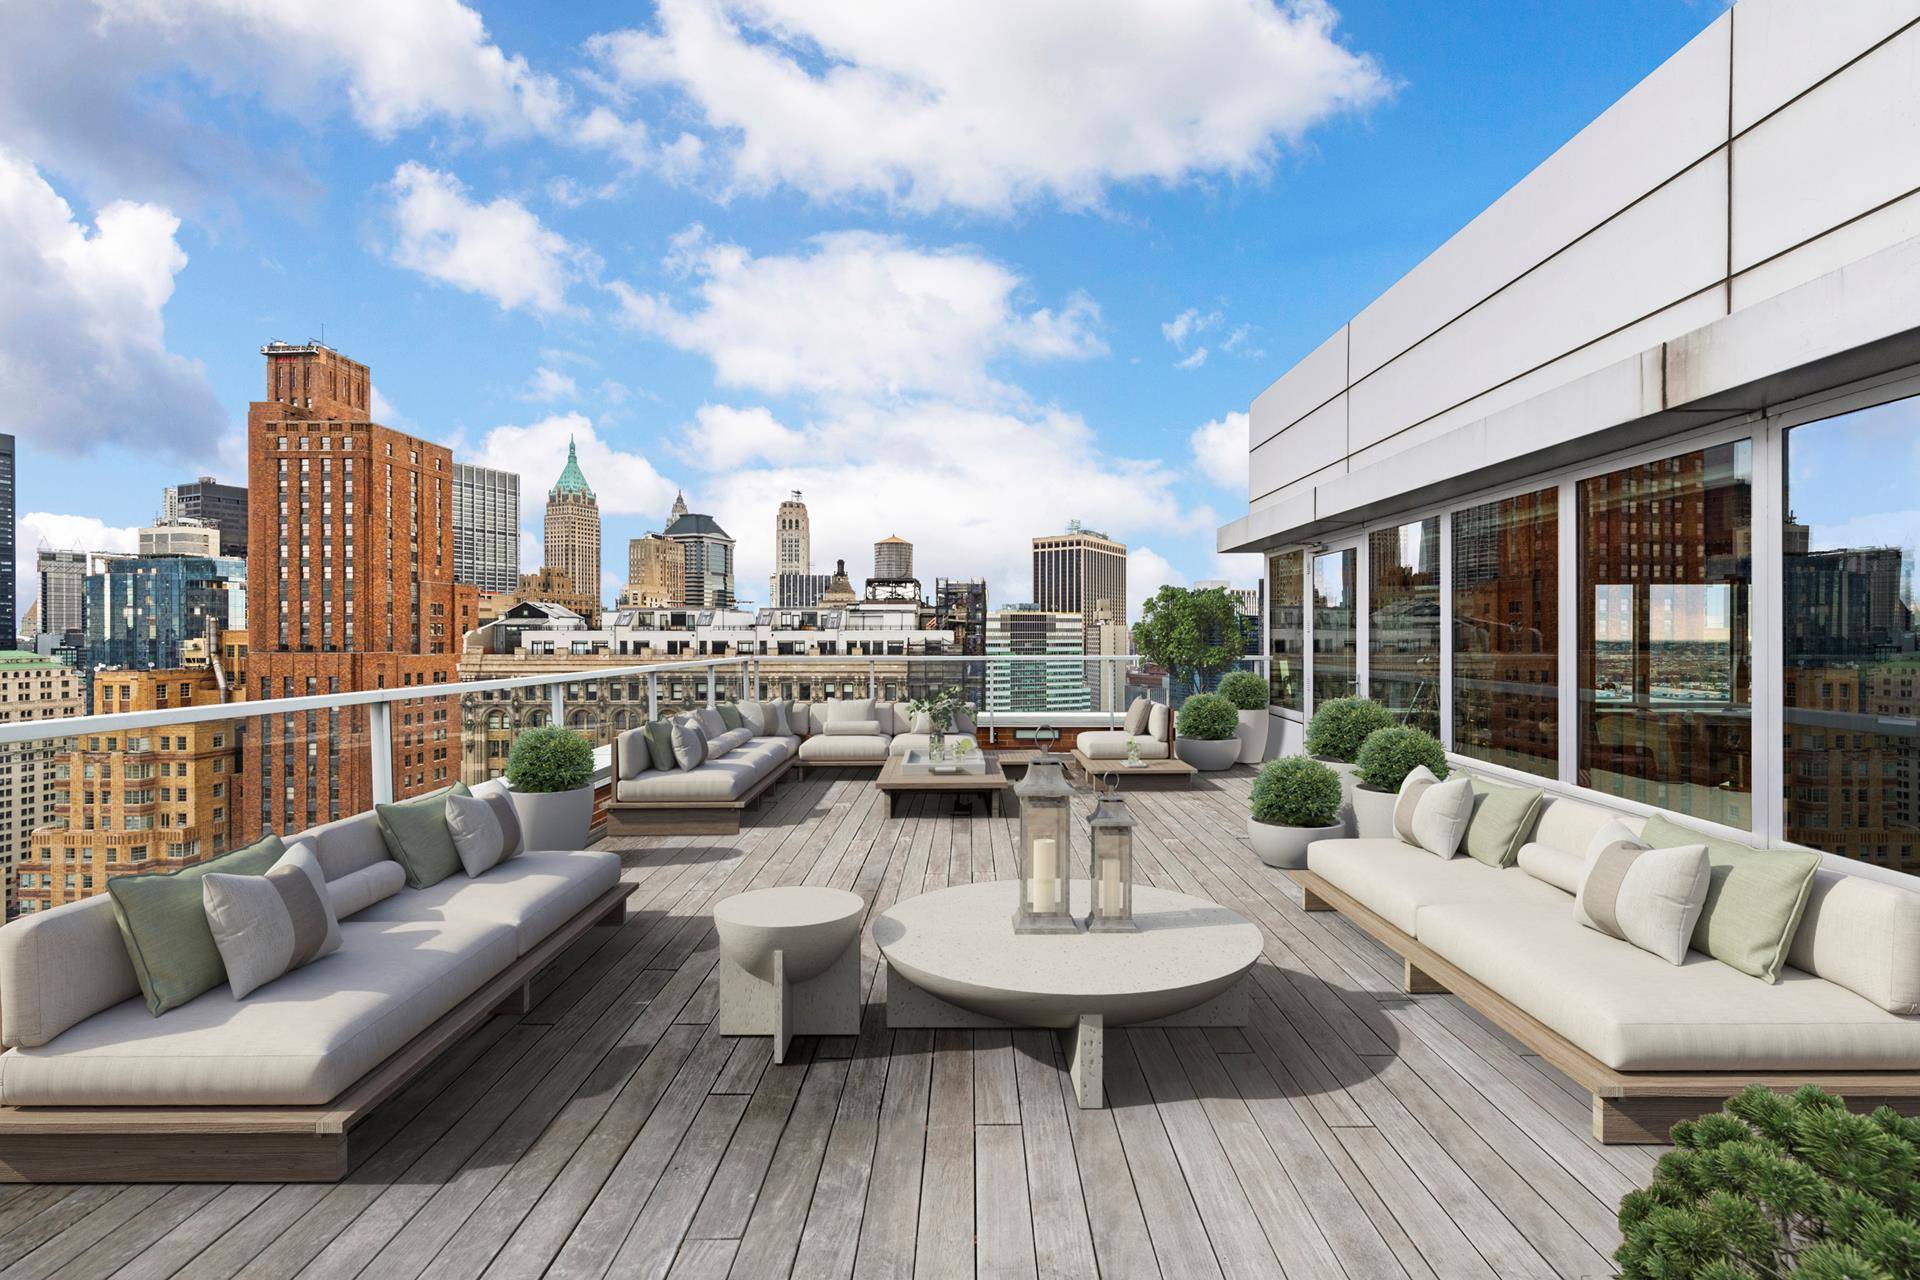 Introducing the Penthouse at 10 Little West StreetWith its palatial proportions, panoramic views and perfect location in the heart of Battery Park City, The Penthouse at 10 West Street balances ...